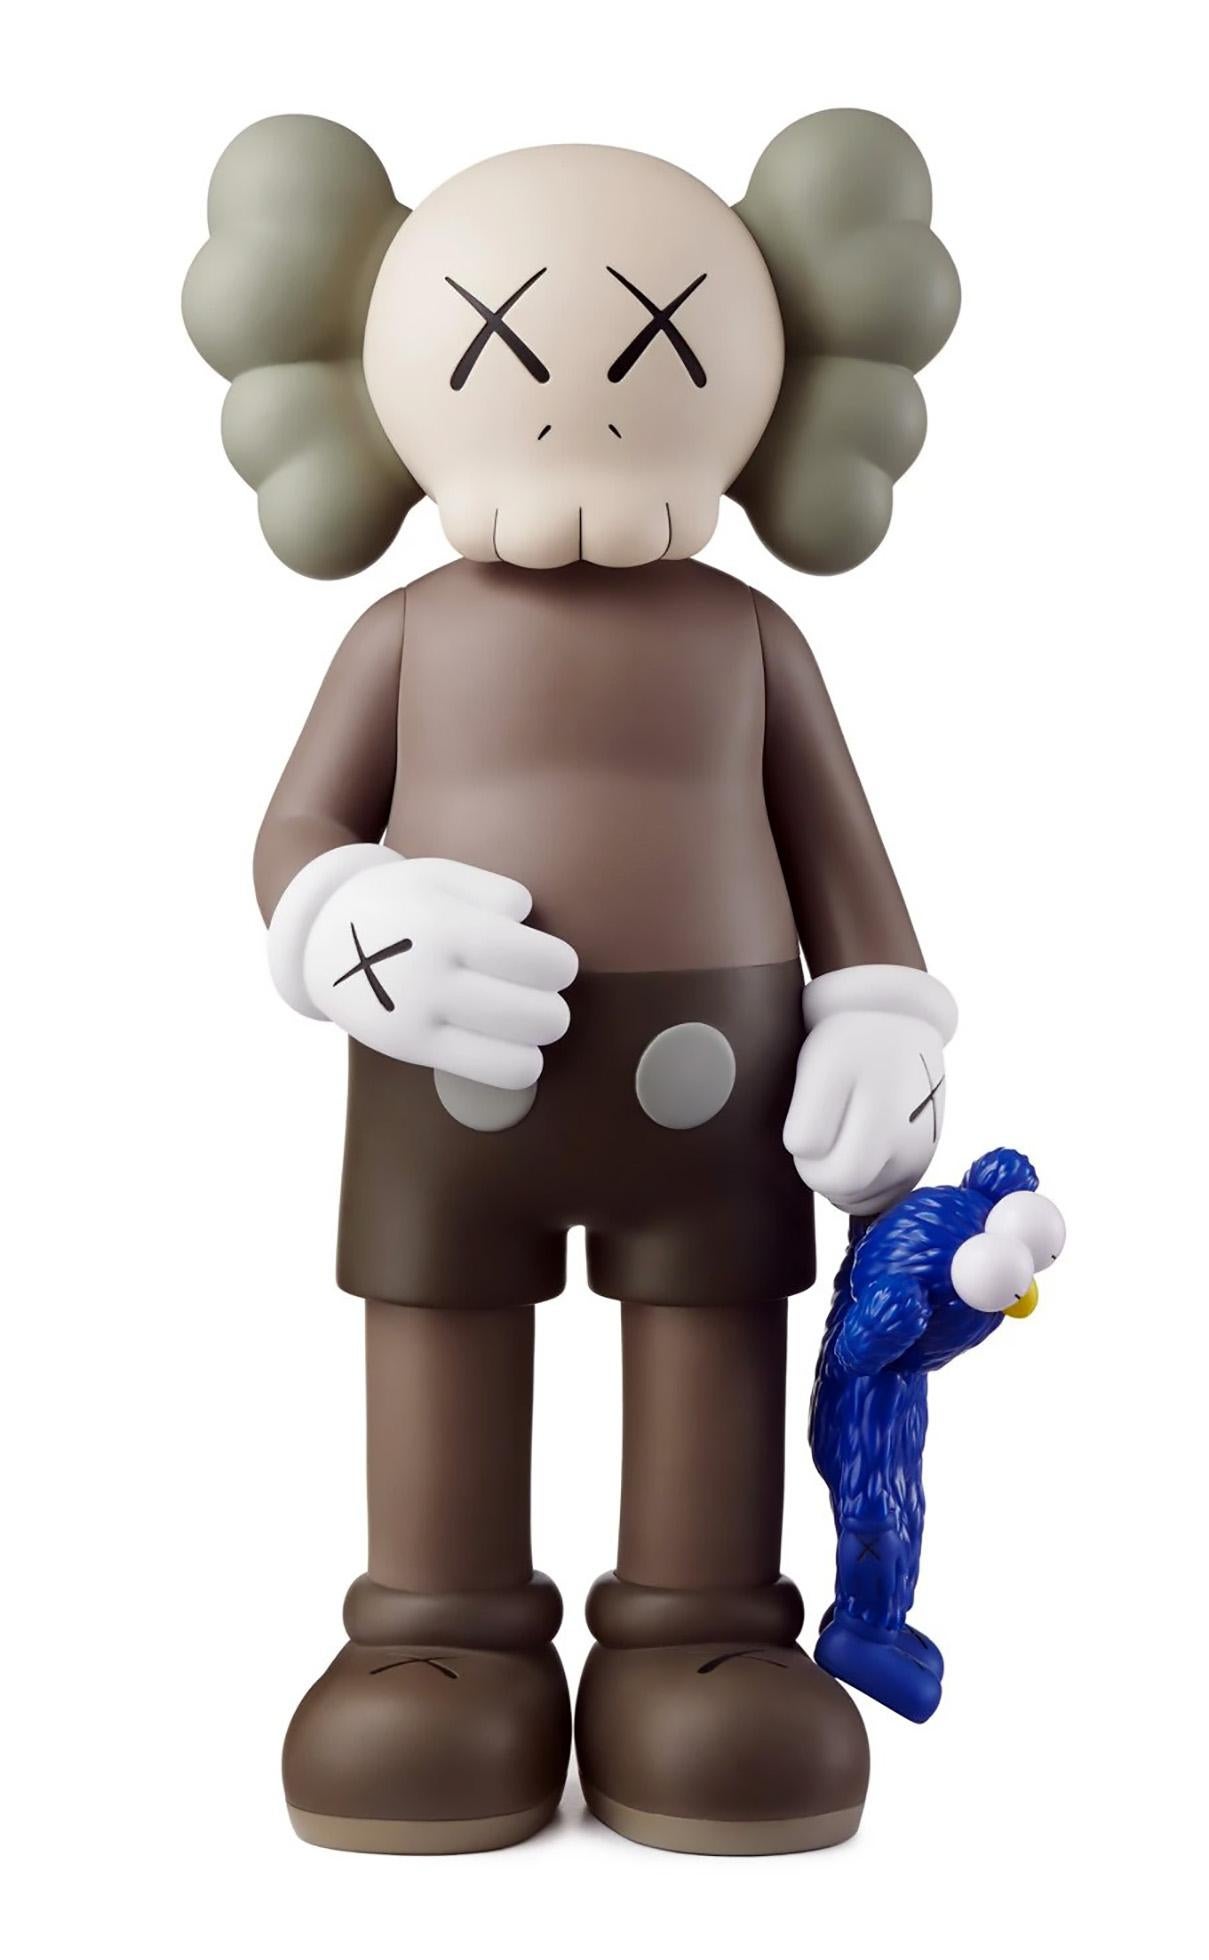 KAWS SHARE Companion (Set of 3): 
Complete Set of 3 KAWS SHARE figurative sculptures, each new & unopened in its original packaging.  KAWS SHARE first appeared in 'BLACKOUT' – the first London solo exhibition by KAWS (Skarstedt London 2019). In